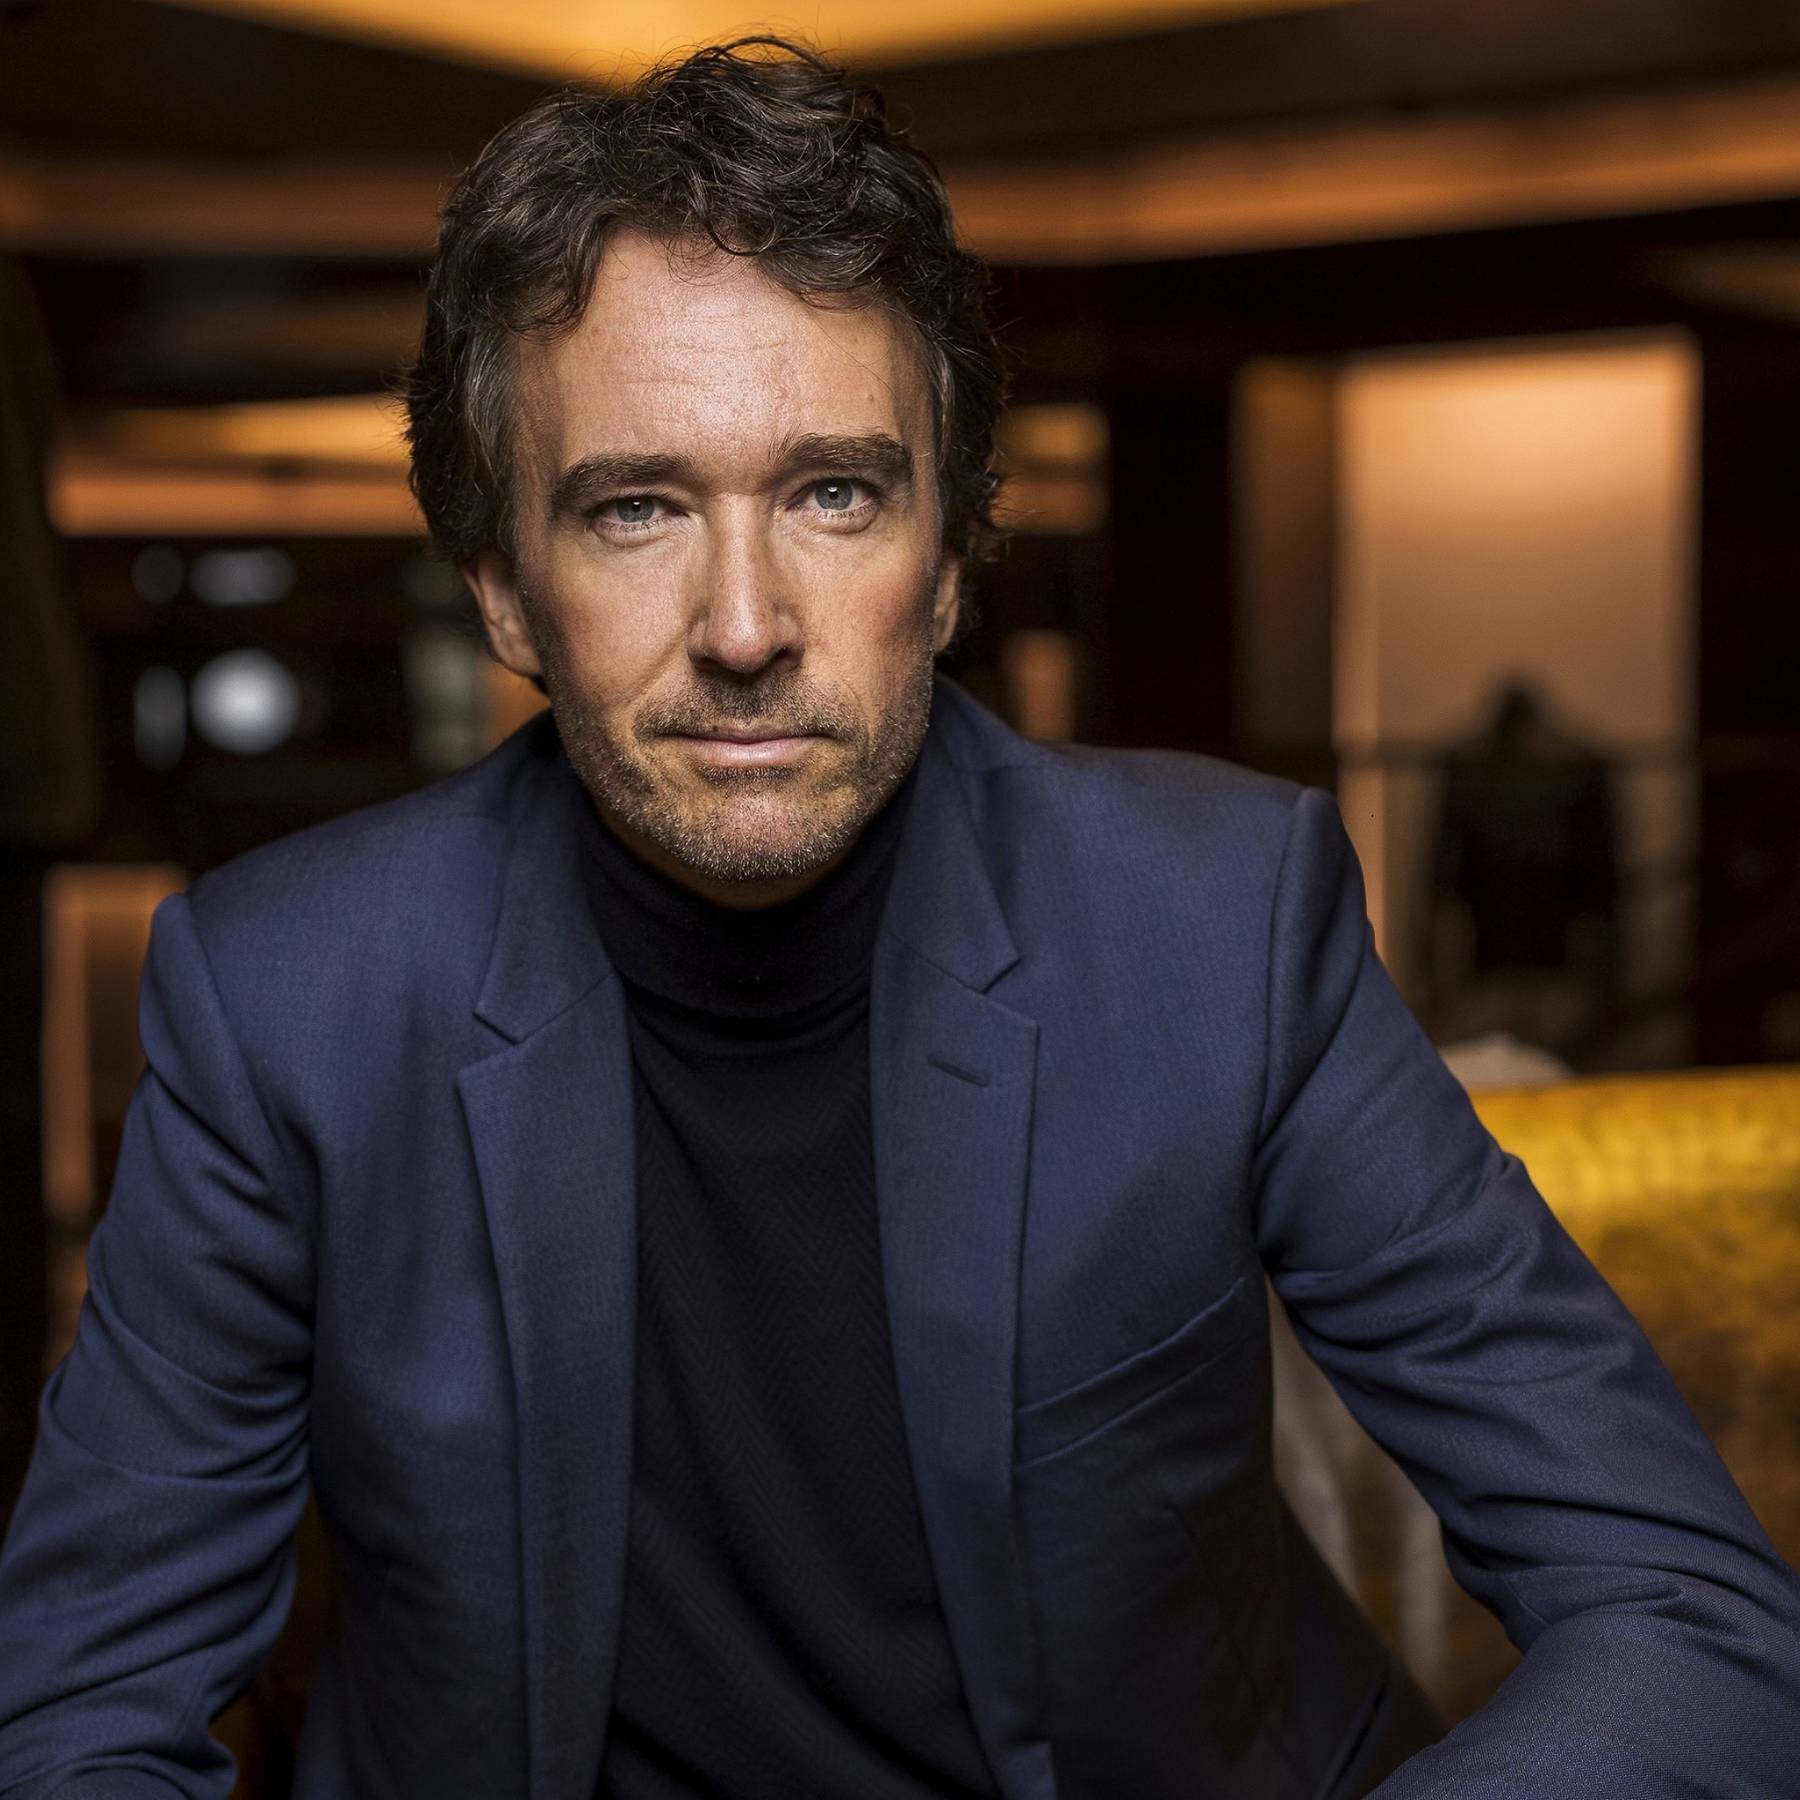 LVMH's Antoine Arnault: Luxury rivals must work together to tackle